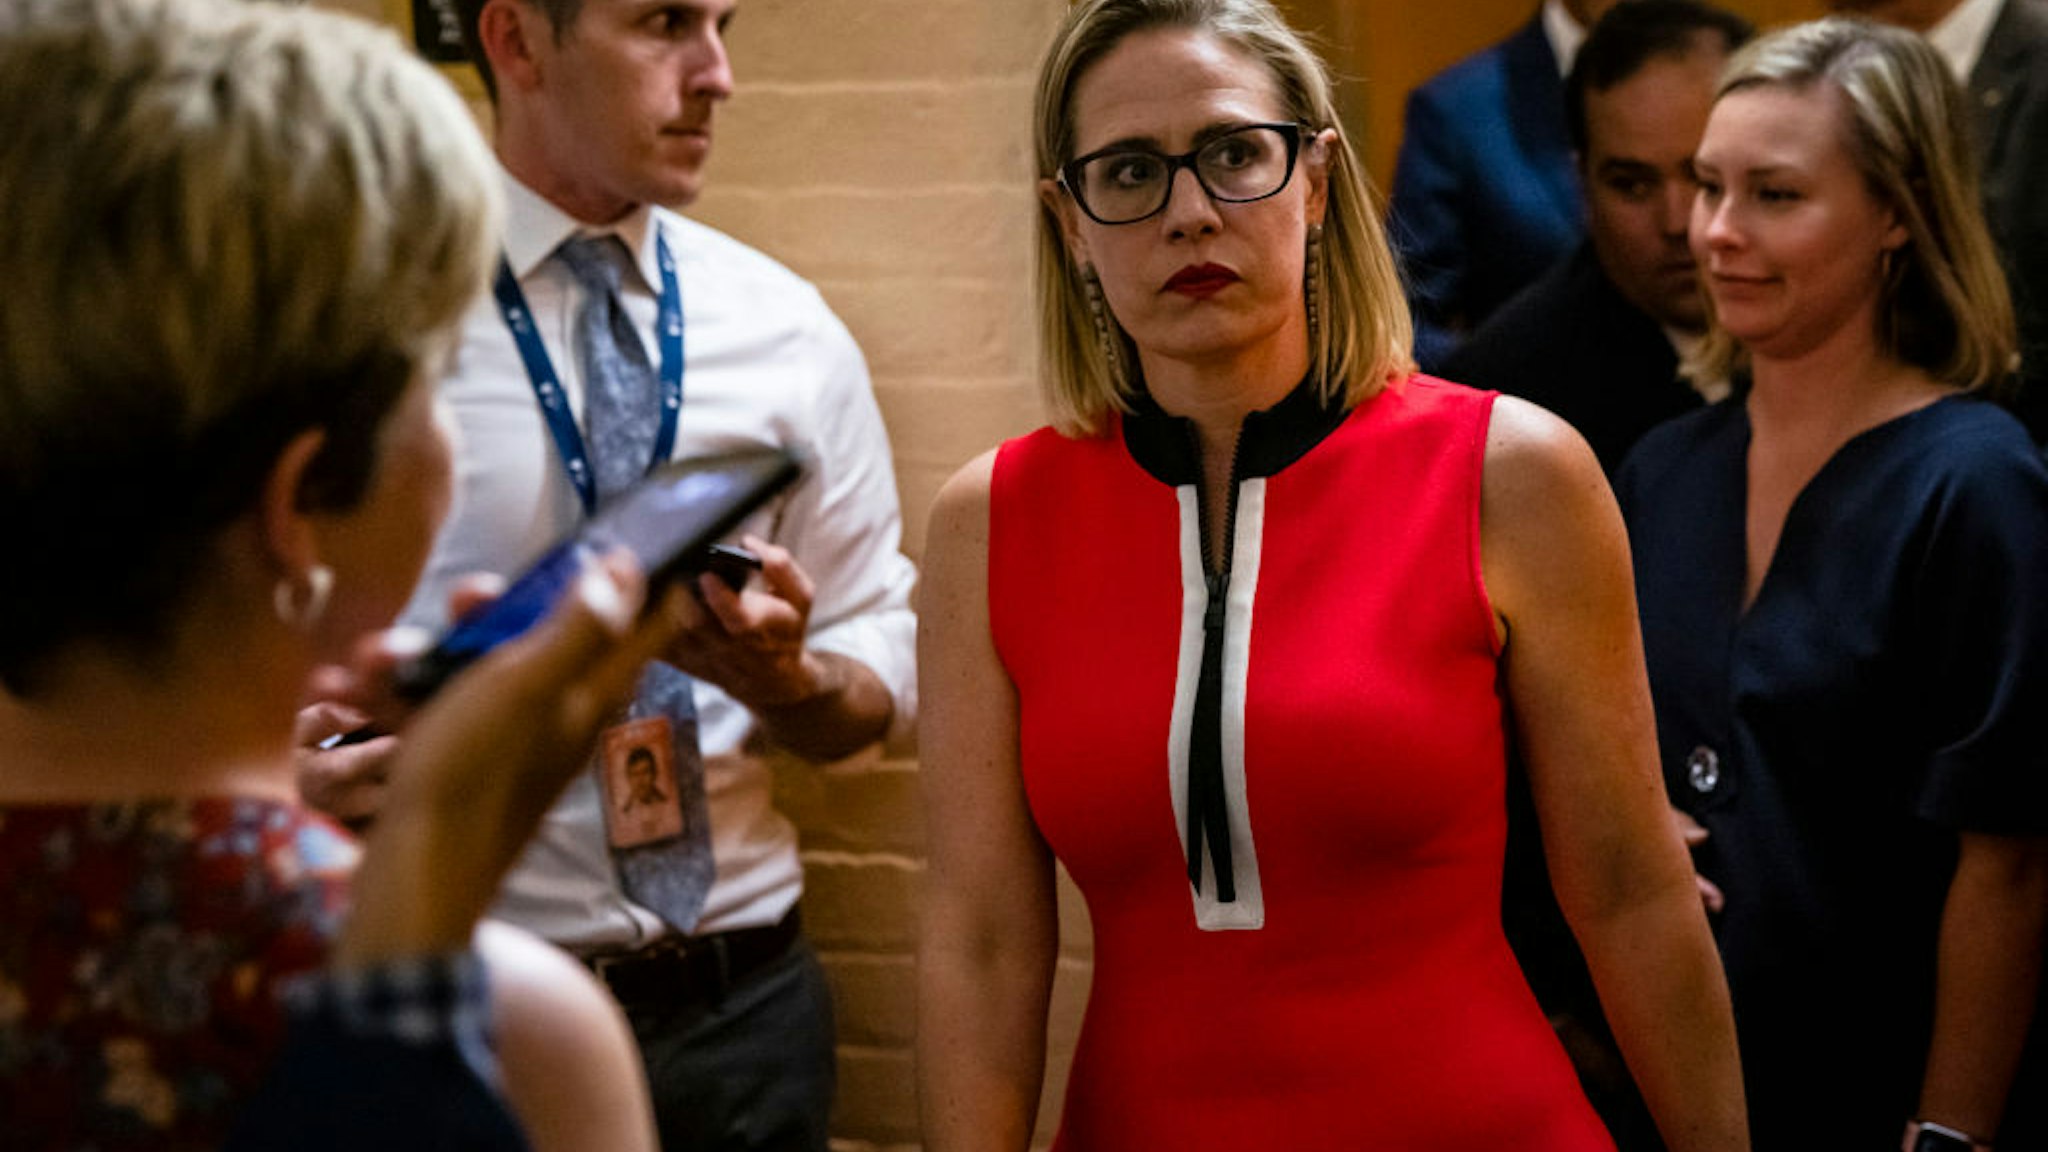 WASHINGTON, DC - JUNE 08: U.S. Sen. Kirsten Sinema (D-AZ) heads back to a bipartisan meeting on infrastructure in the basement of the U.S. Capitol building after the original talks fell through with the White House on June 8, 2021 in Washington, DC. Senate Majority Leader Chuck Schumer (D-NY) said they are now pursuing a two-path proposal that includes a new set of negotiations with a bipartisan group of senators.